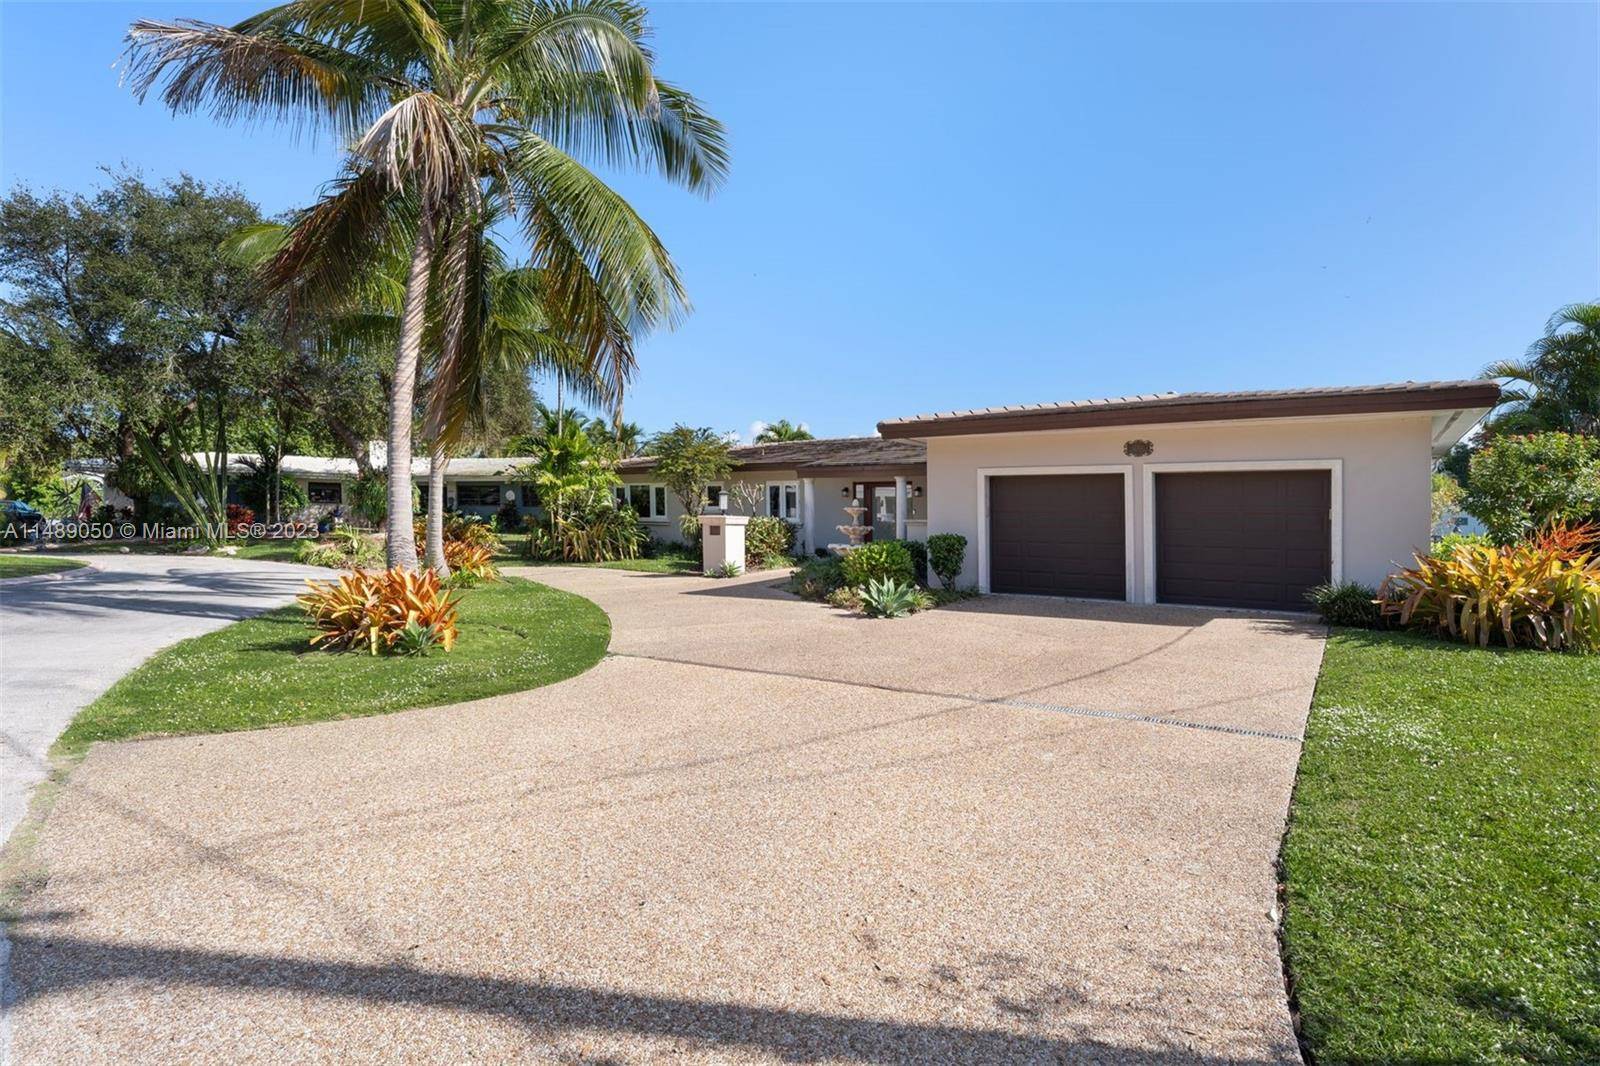 Updated ranch style single story home in the sought after Gables by the Sea community.